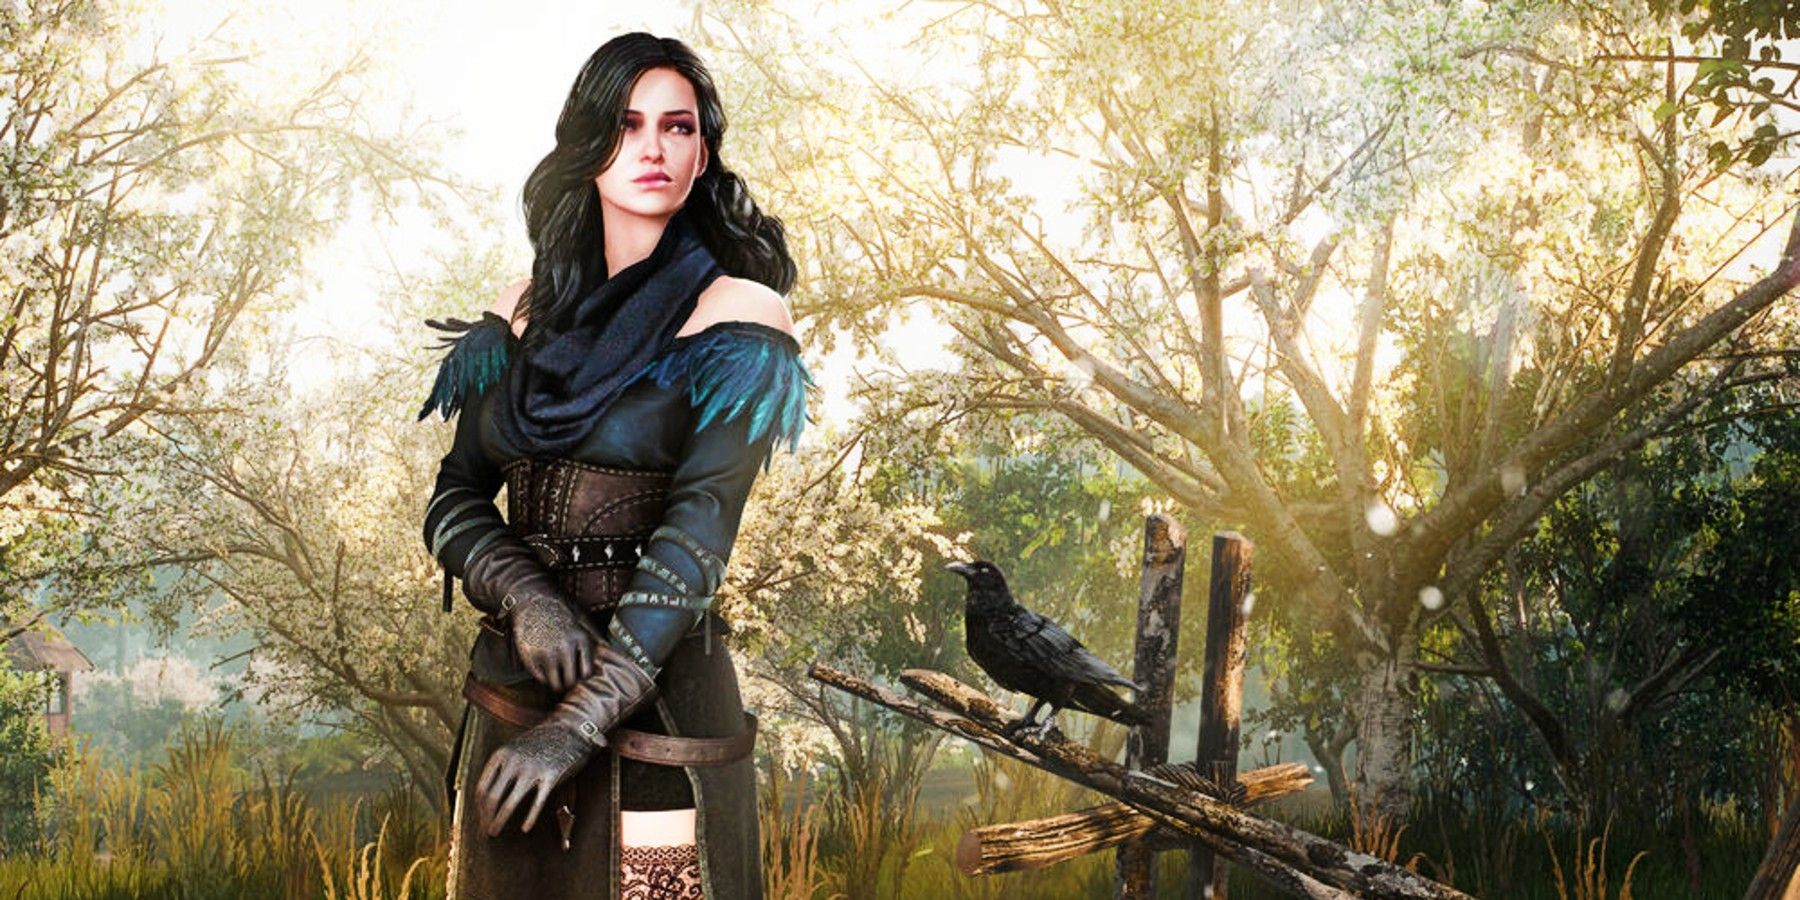 Stylish The Witcher 3 Fan Art Shows Yennefer In Her Alternate Outfit